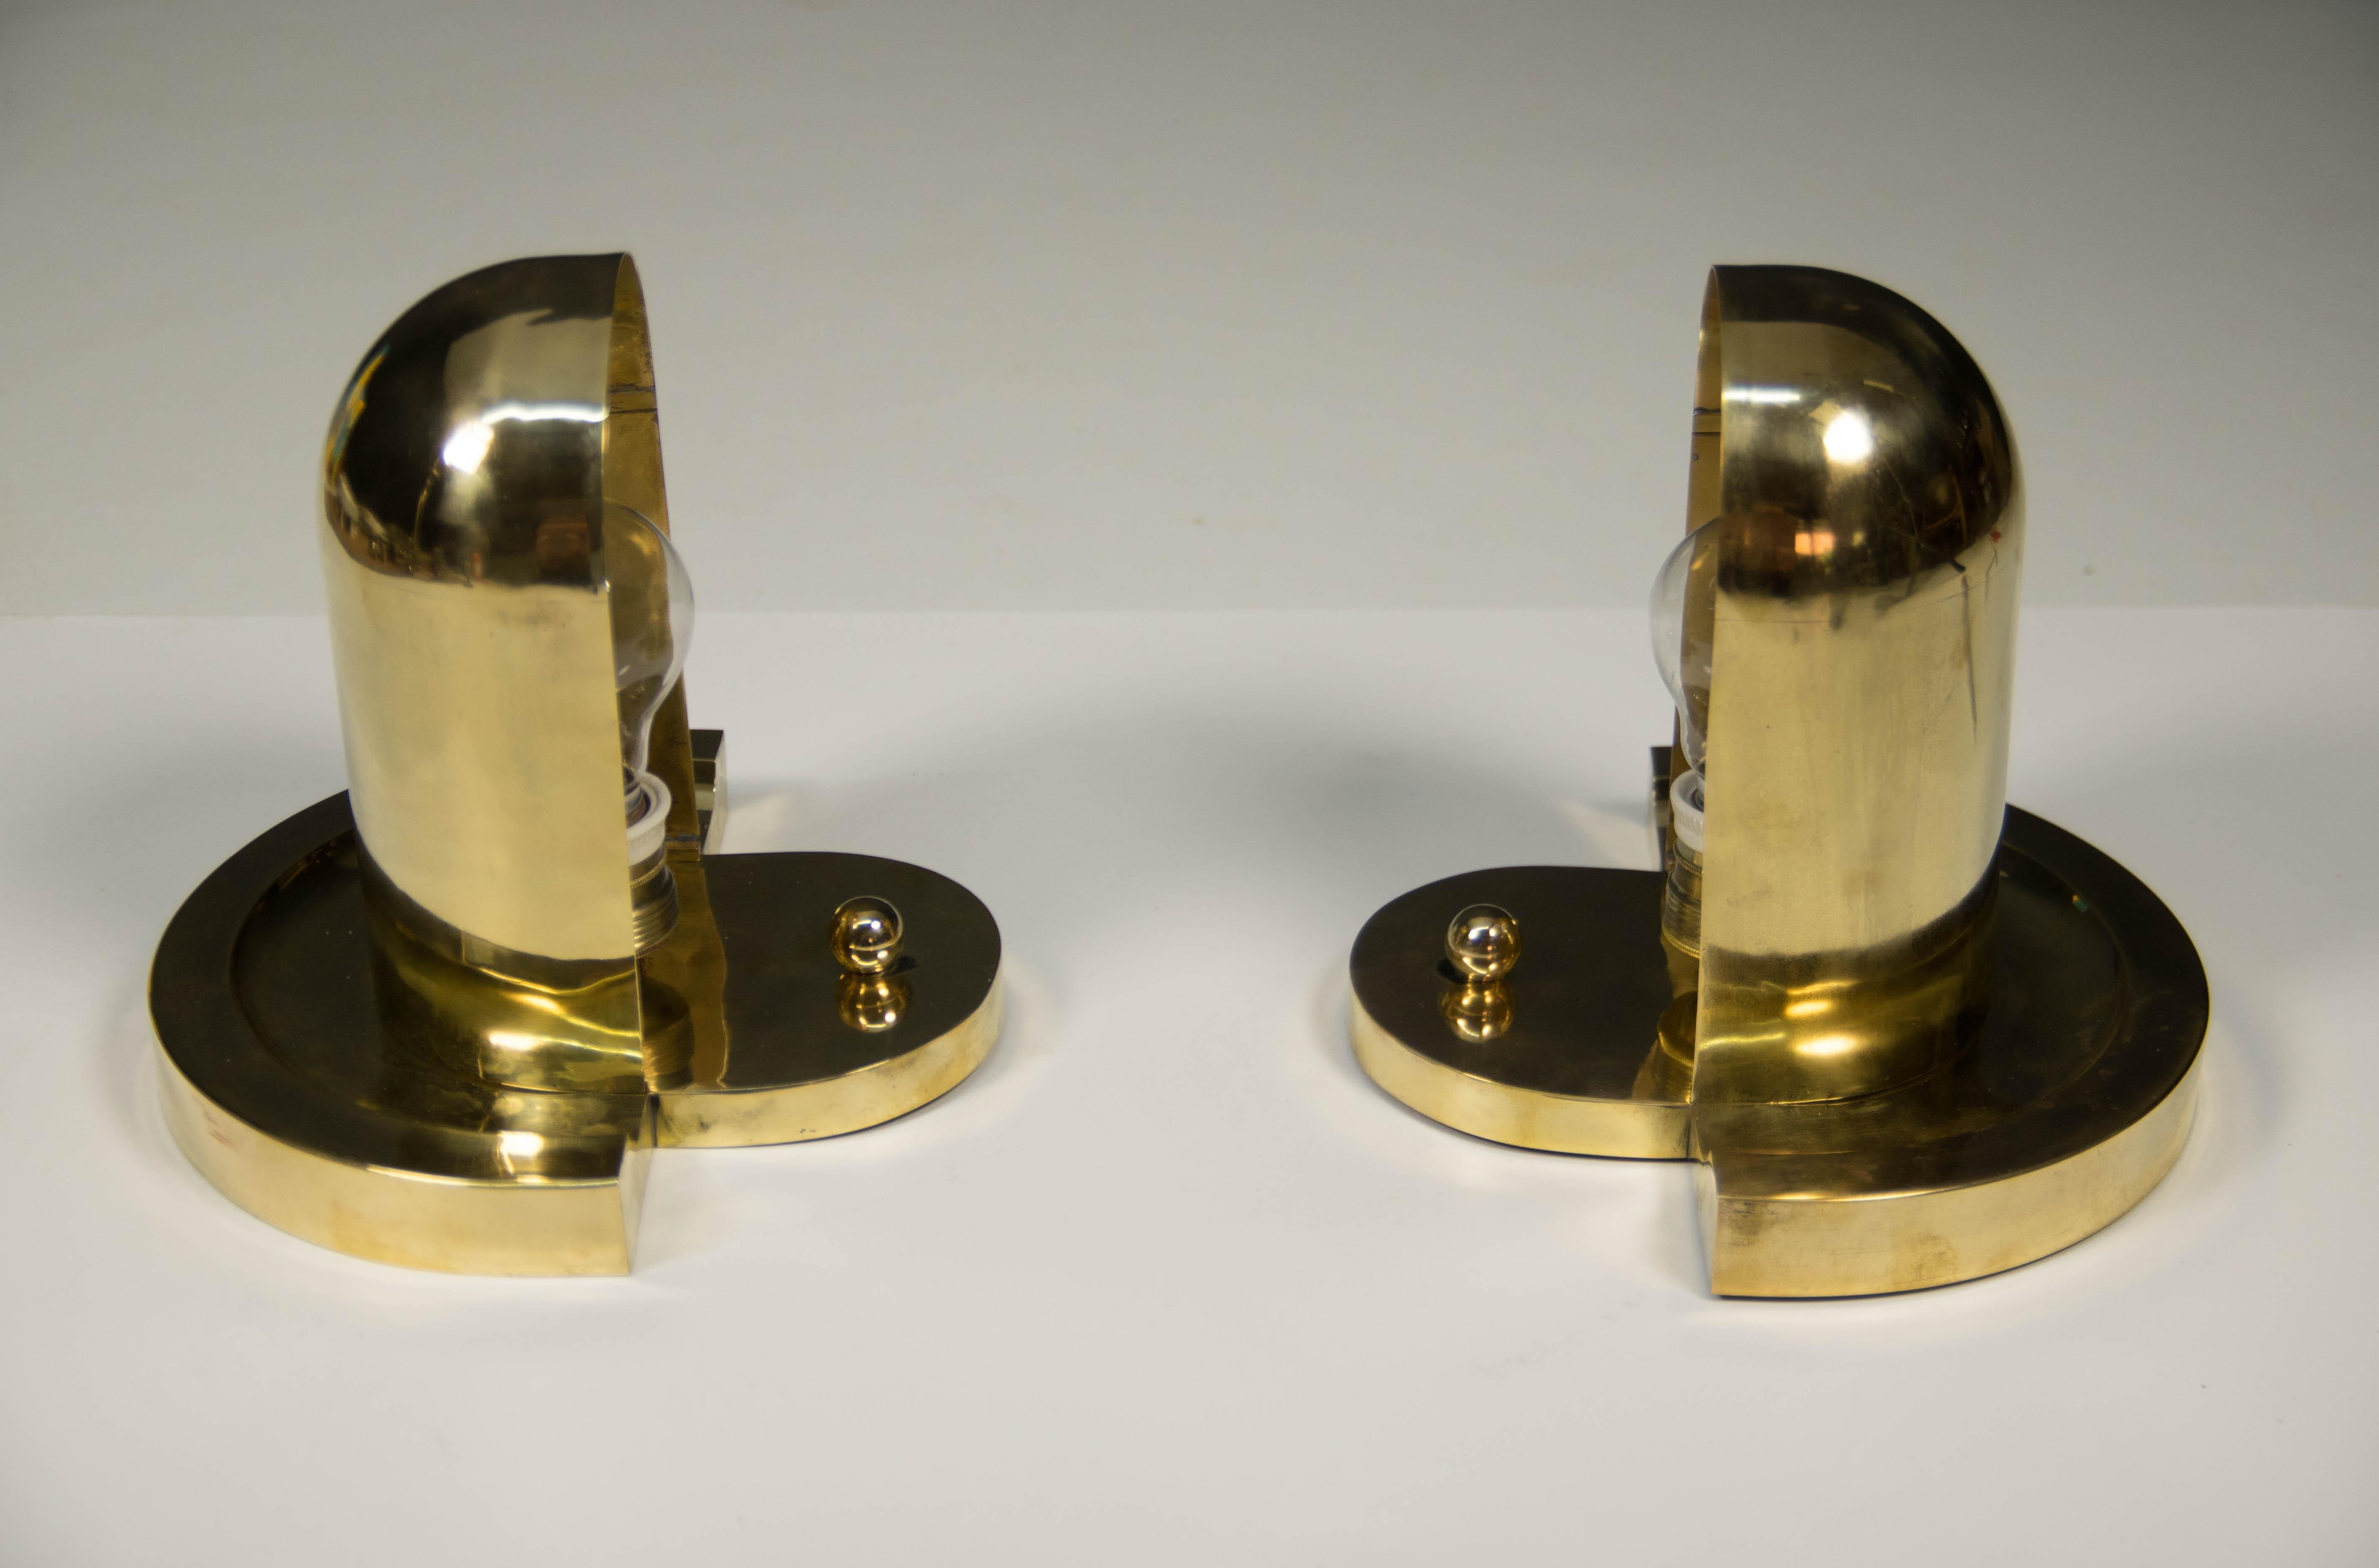 Set of Unique Cubistic Brass Wall Lamps, 1920s For Sale 3